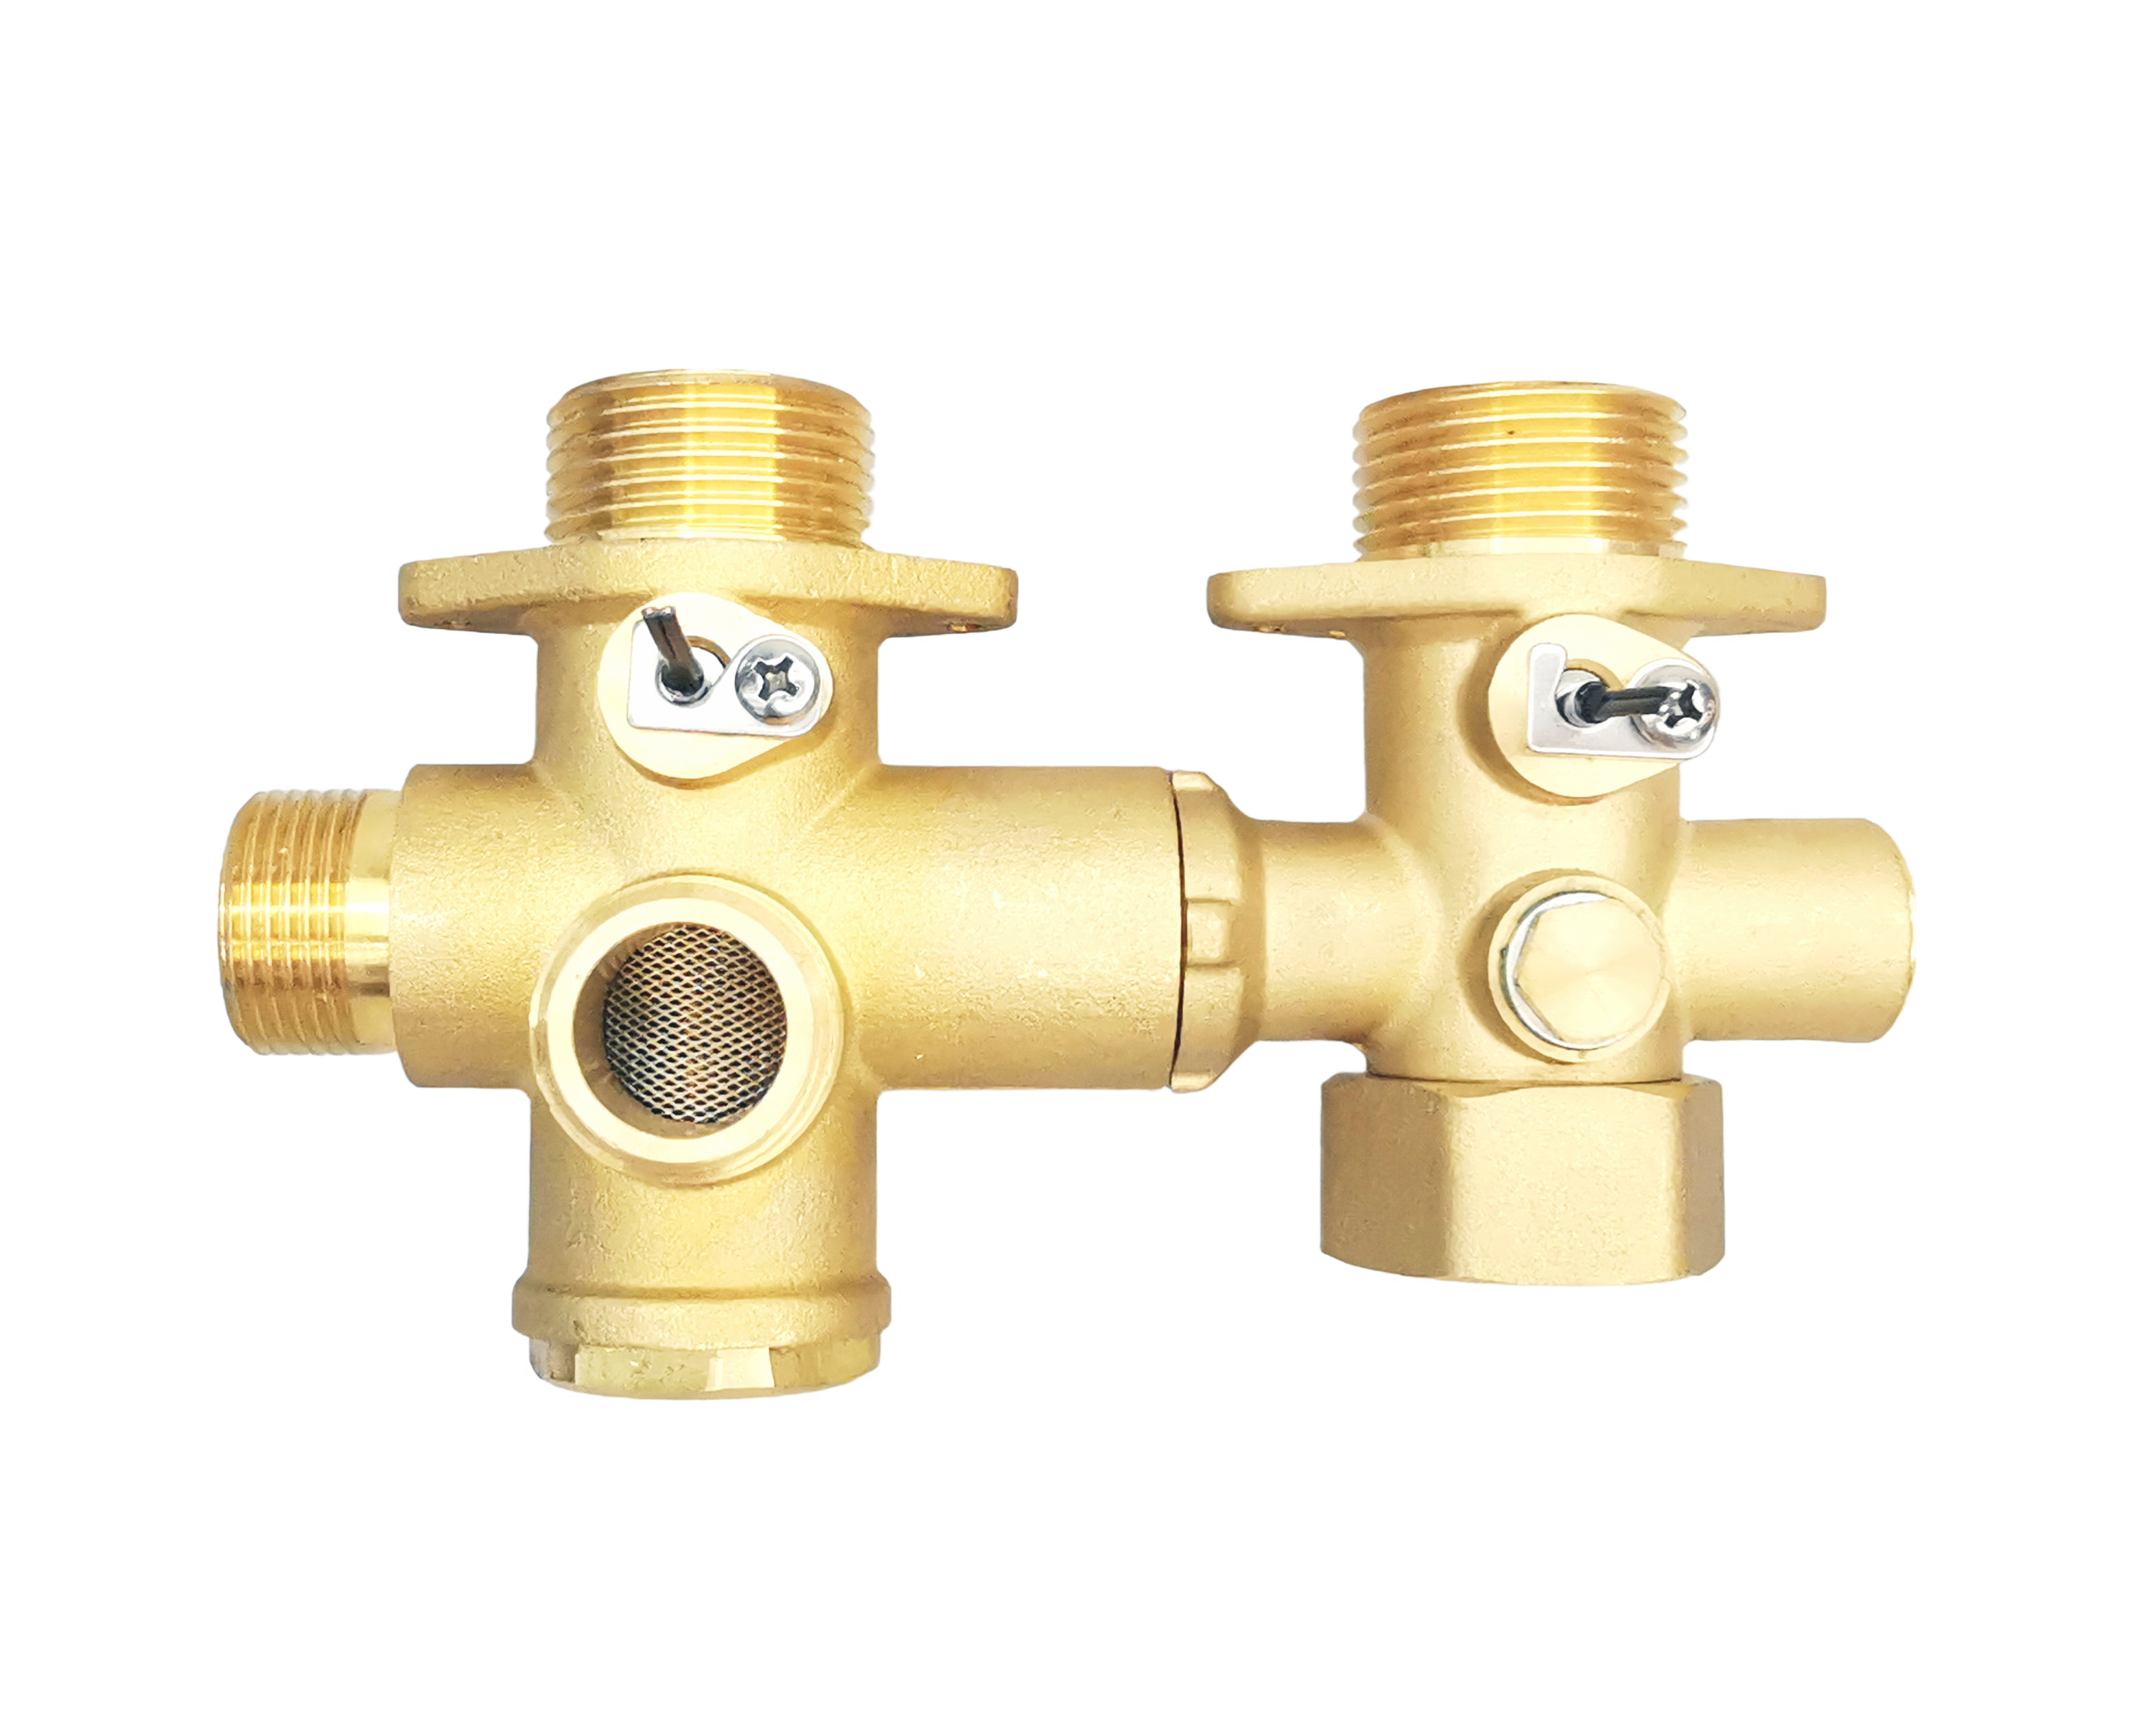 Primary side valve group